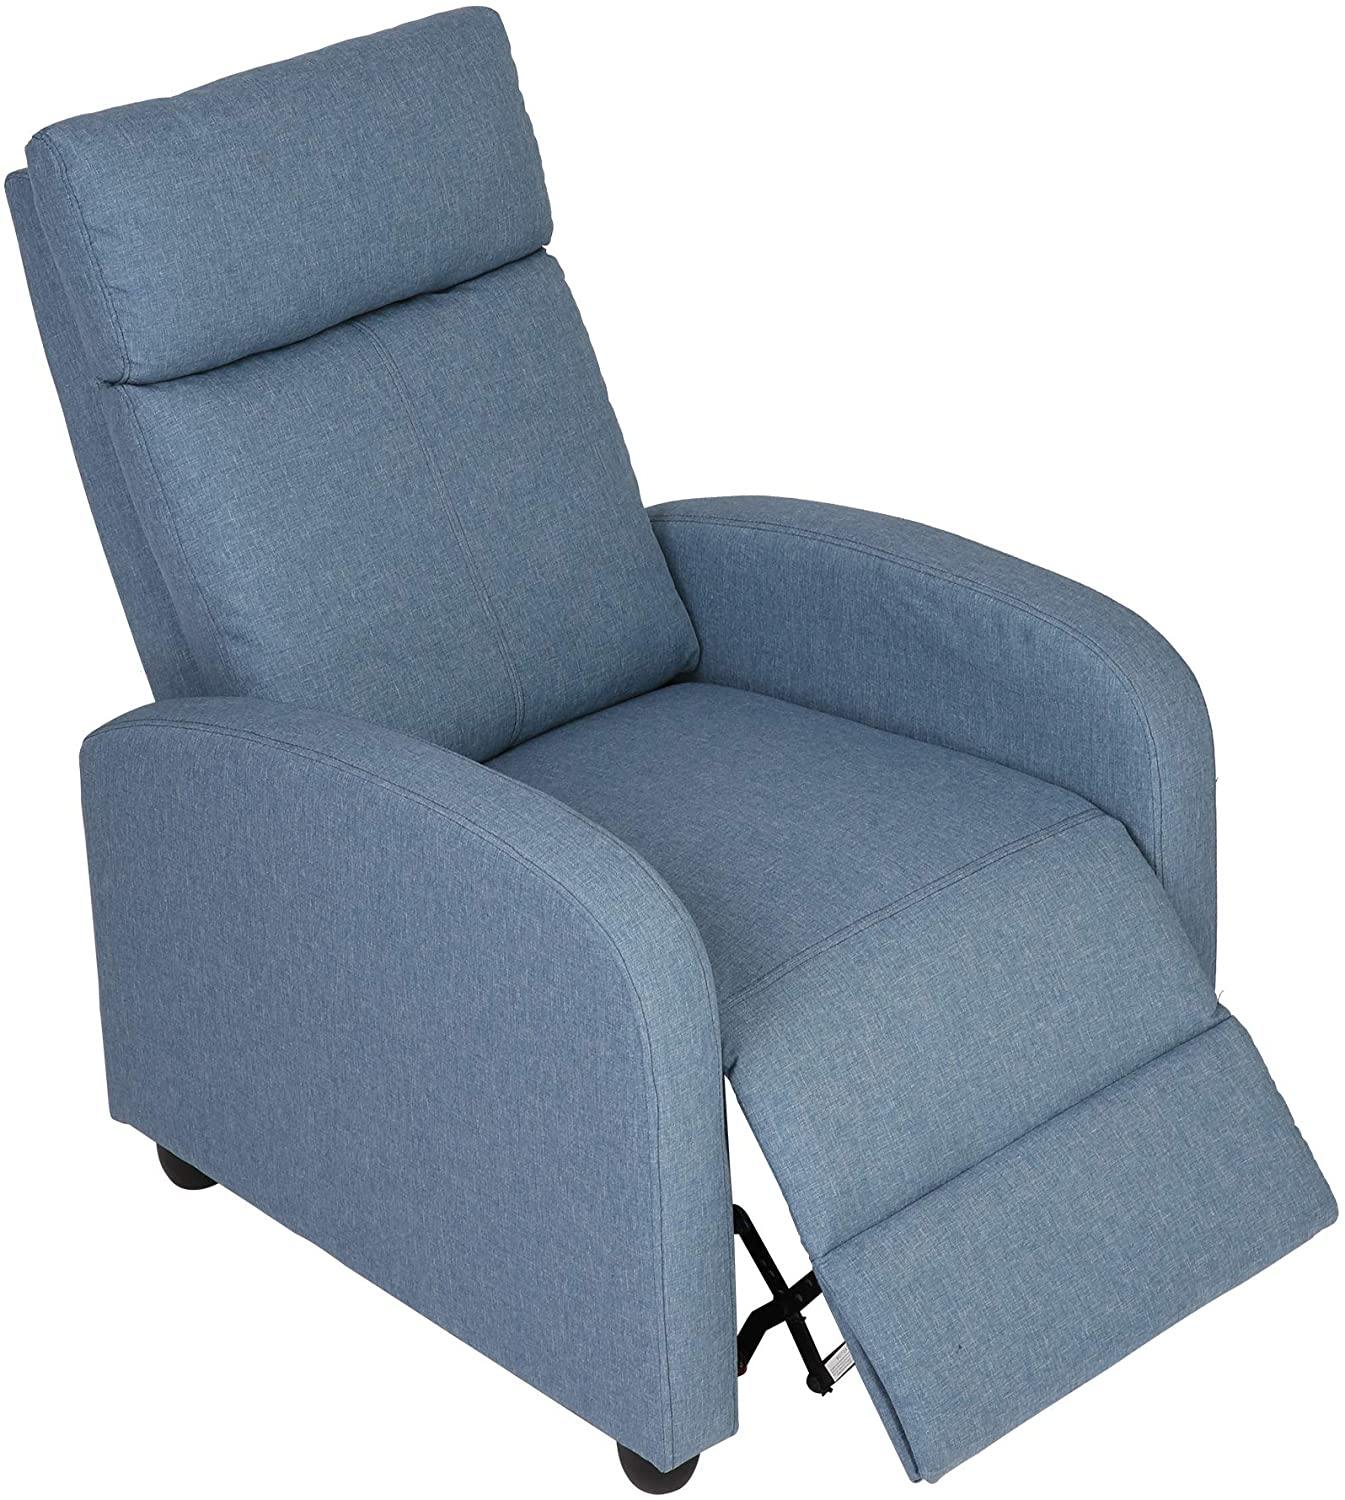 Fabric Recliner Chair Adjustable Single Sofa Home Theater Seating Recliner Reading Sofa for Living Room & Bedroom, Blue - Bosonshop